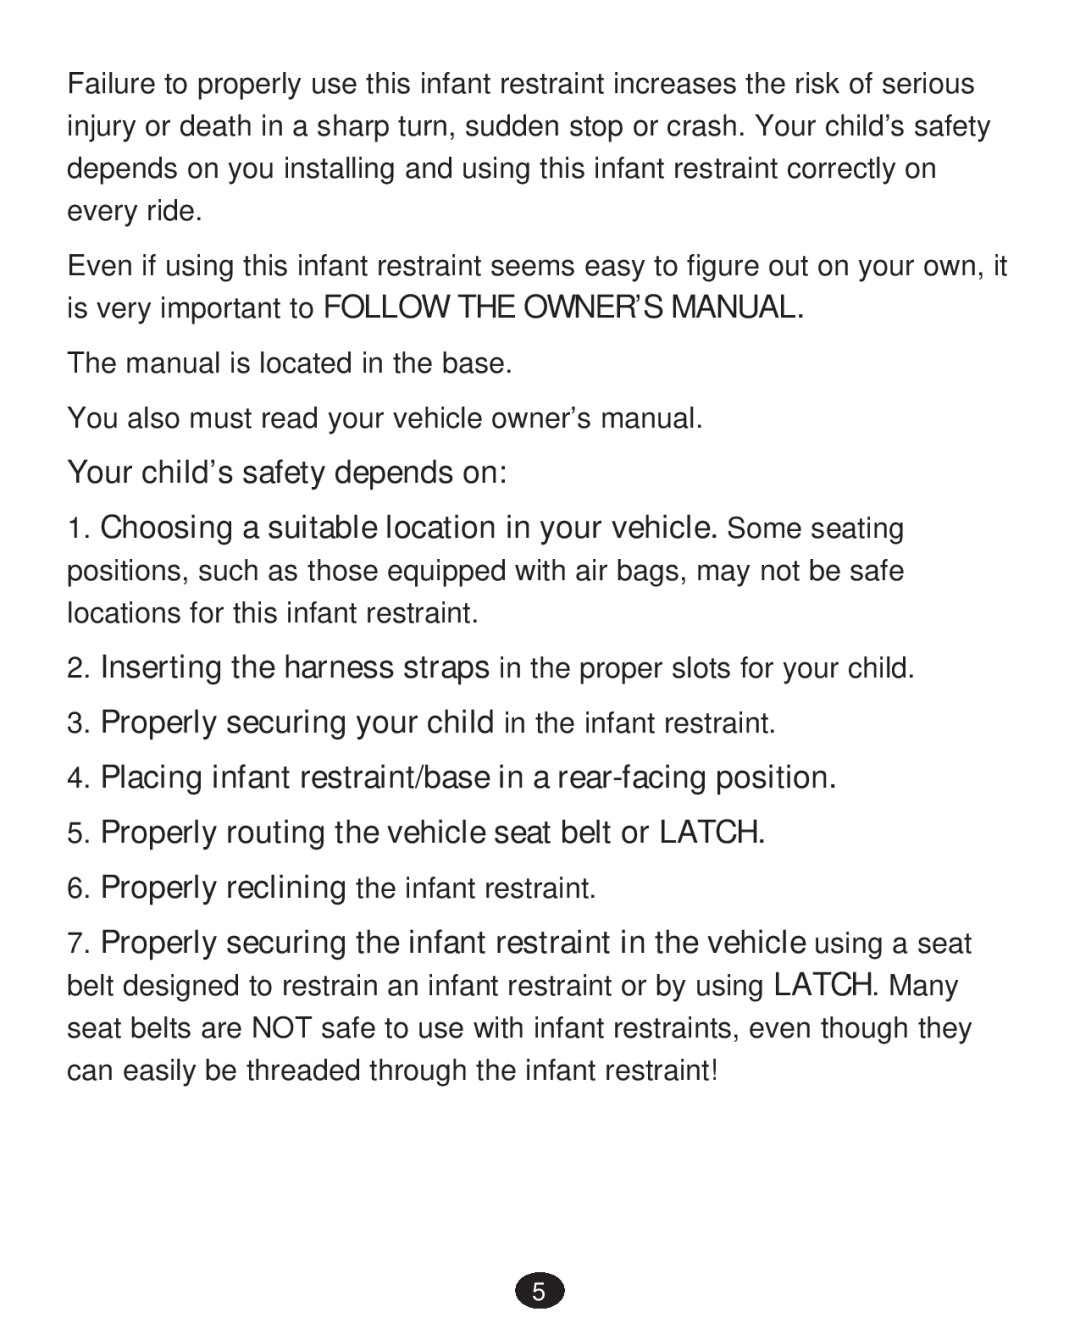 Graco 30 manual Your child’s safety depends on, Properly securing your child in the infant restraint 